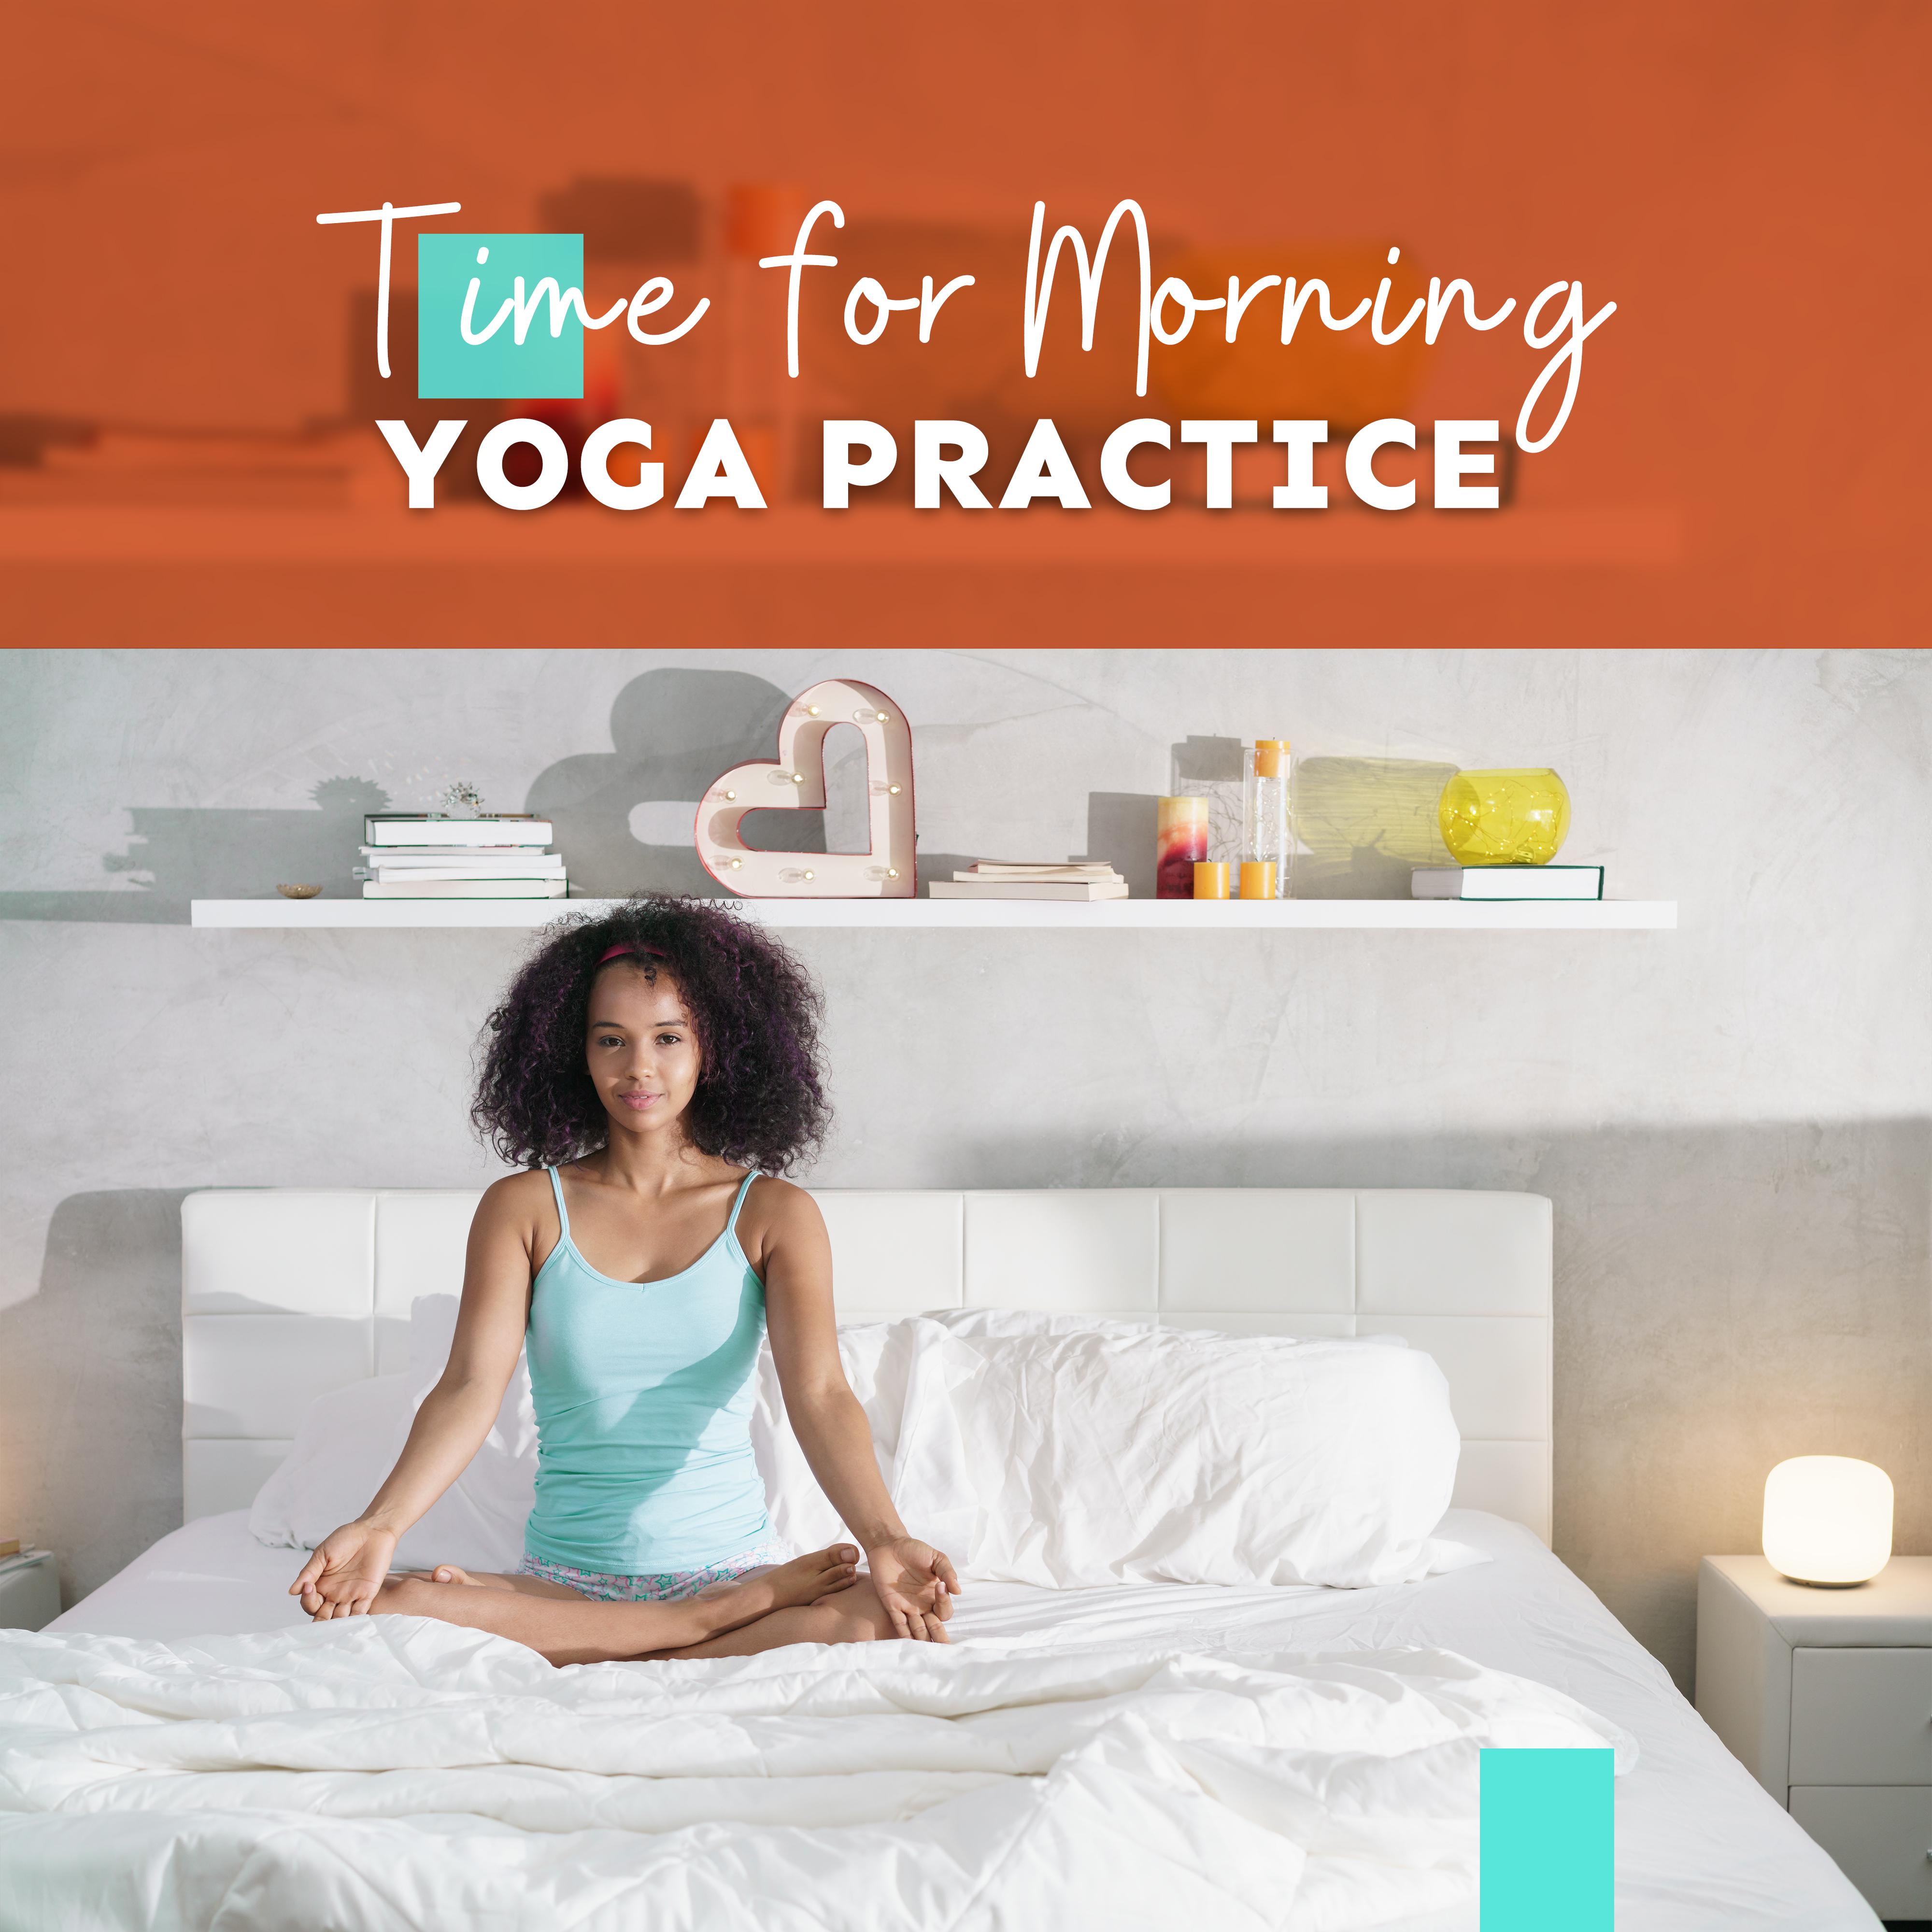 Time for Morning Yoga Practice: 2019 Ambient New Age Music Created for Yoga Poses Training, Morning Contemplation, Boost Your Body & Minc, Increase Your Vital Energy for All Day